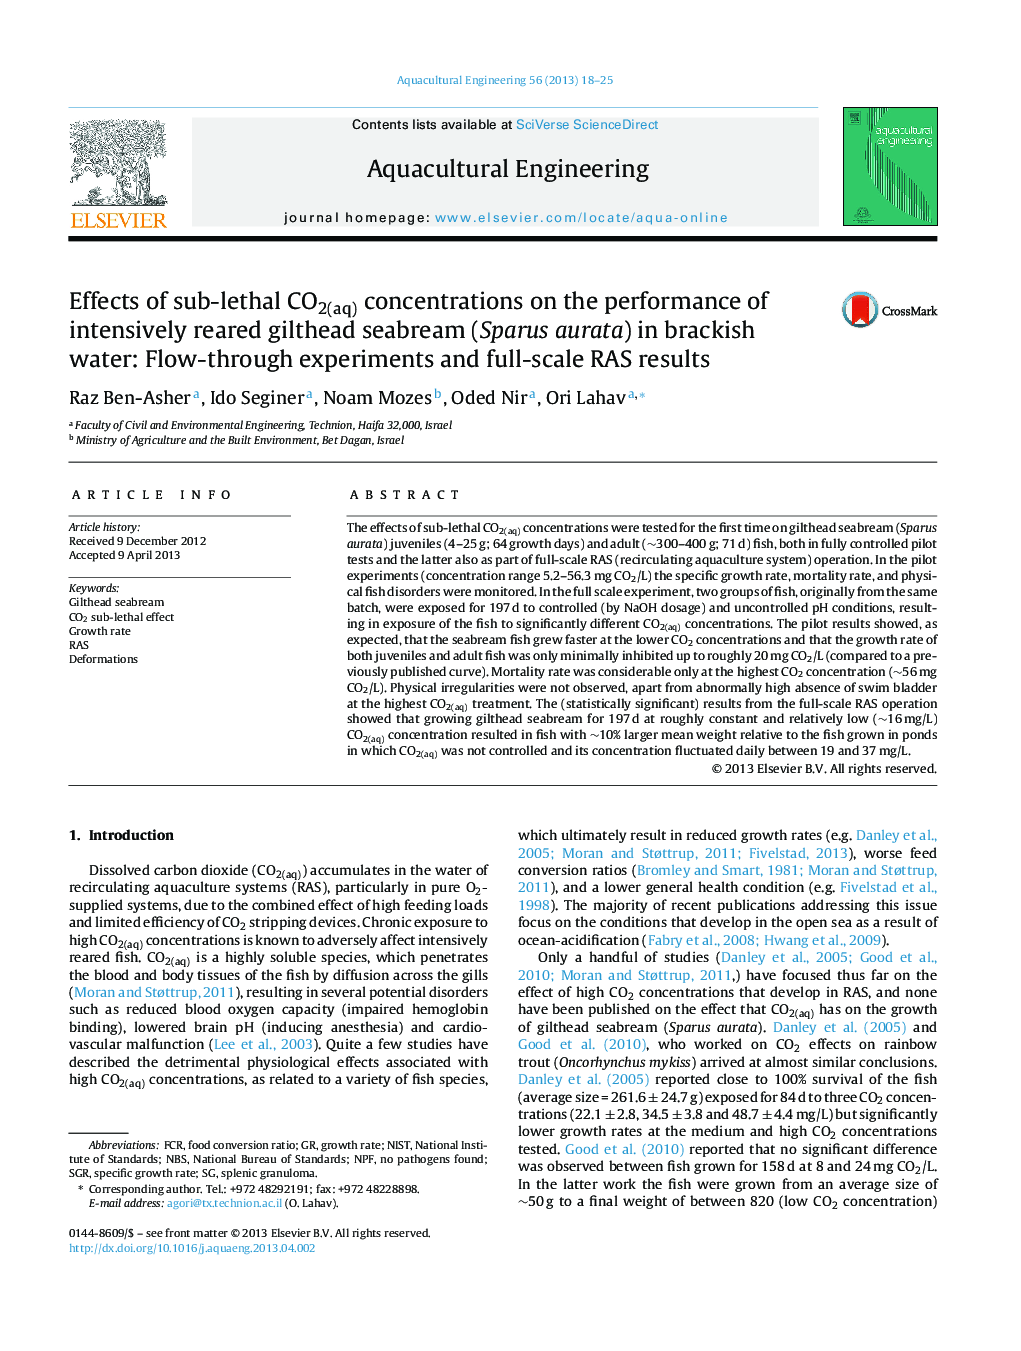 Effects of sub-lethal CO2(aq) concentrations on the performance of intensively reared gilthead seabream (Sparus aurata) in brackish water: Flow-through experiments and full-scale RAS results